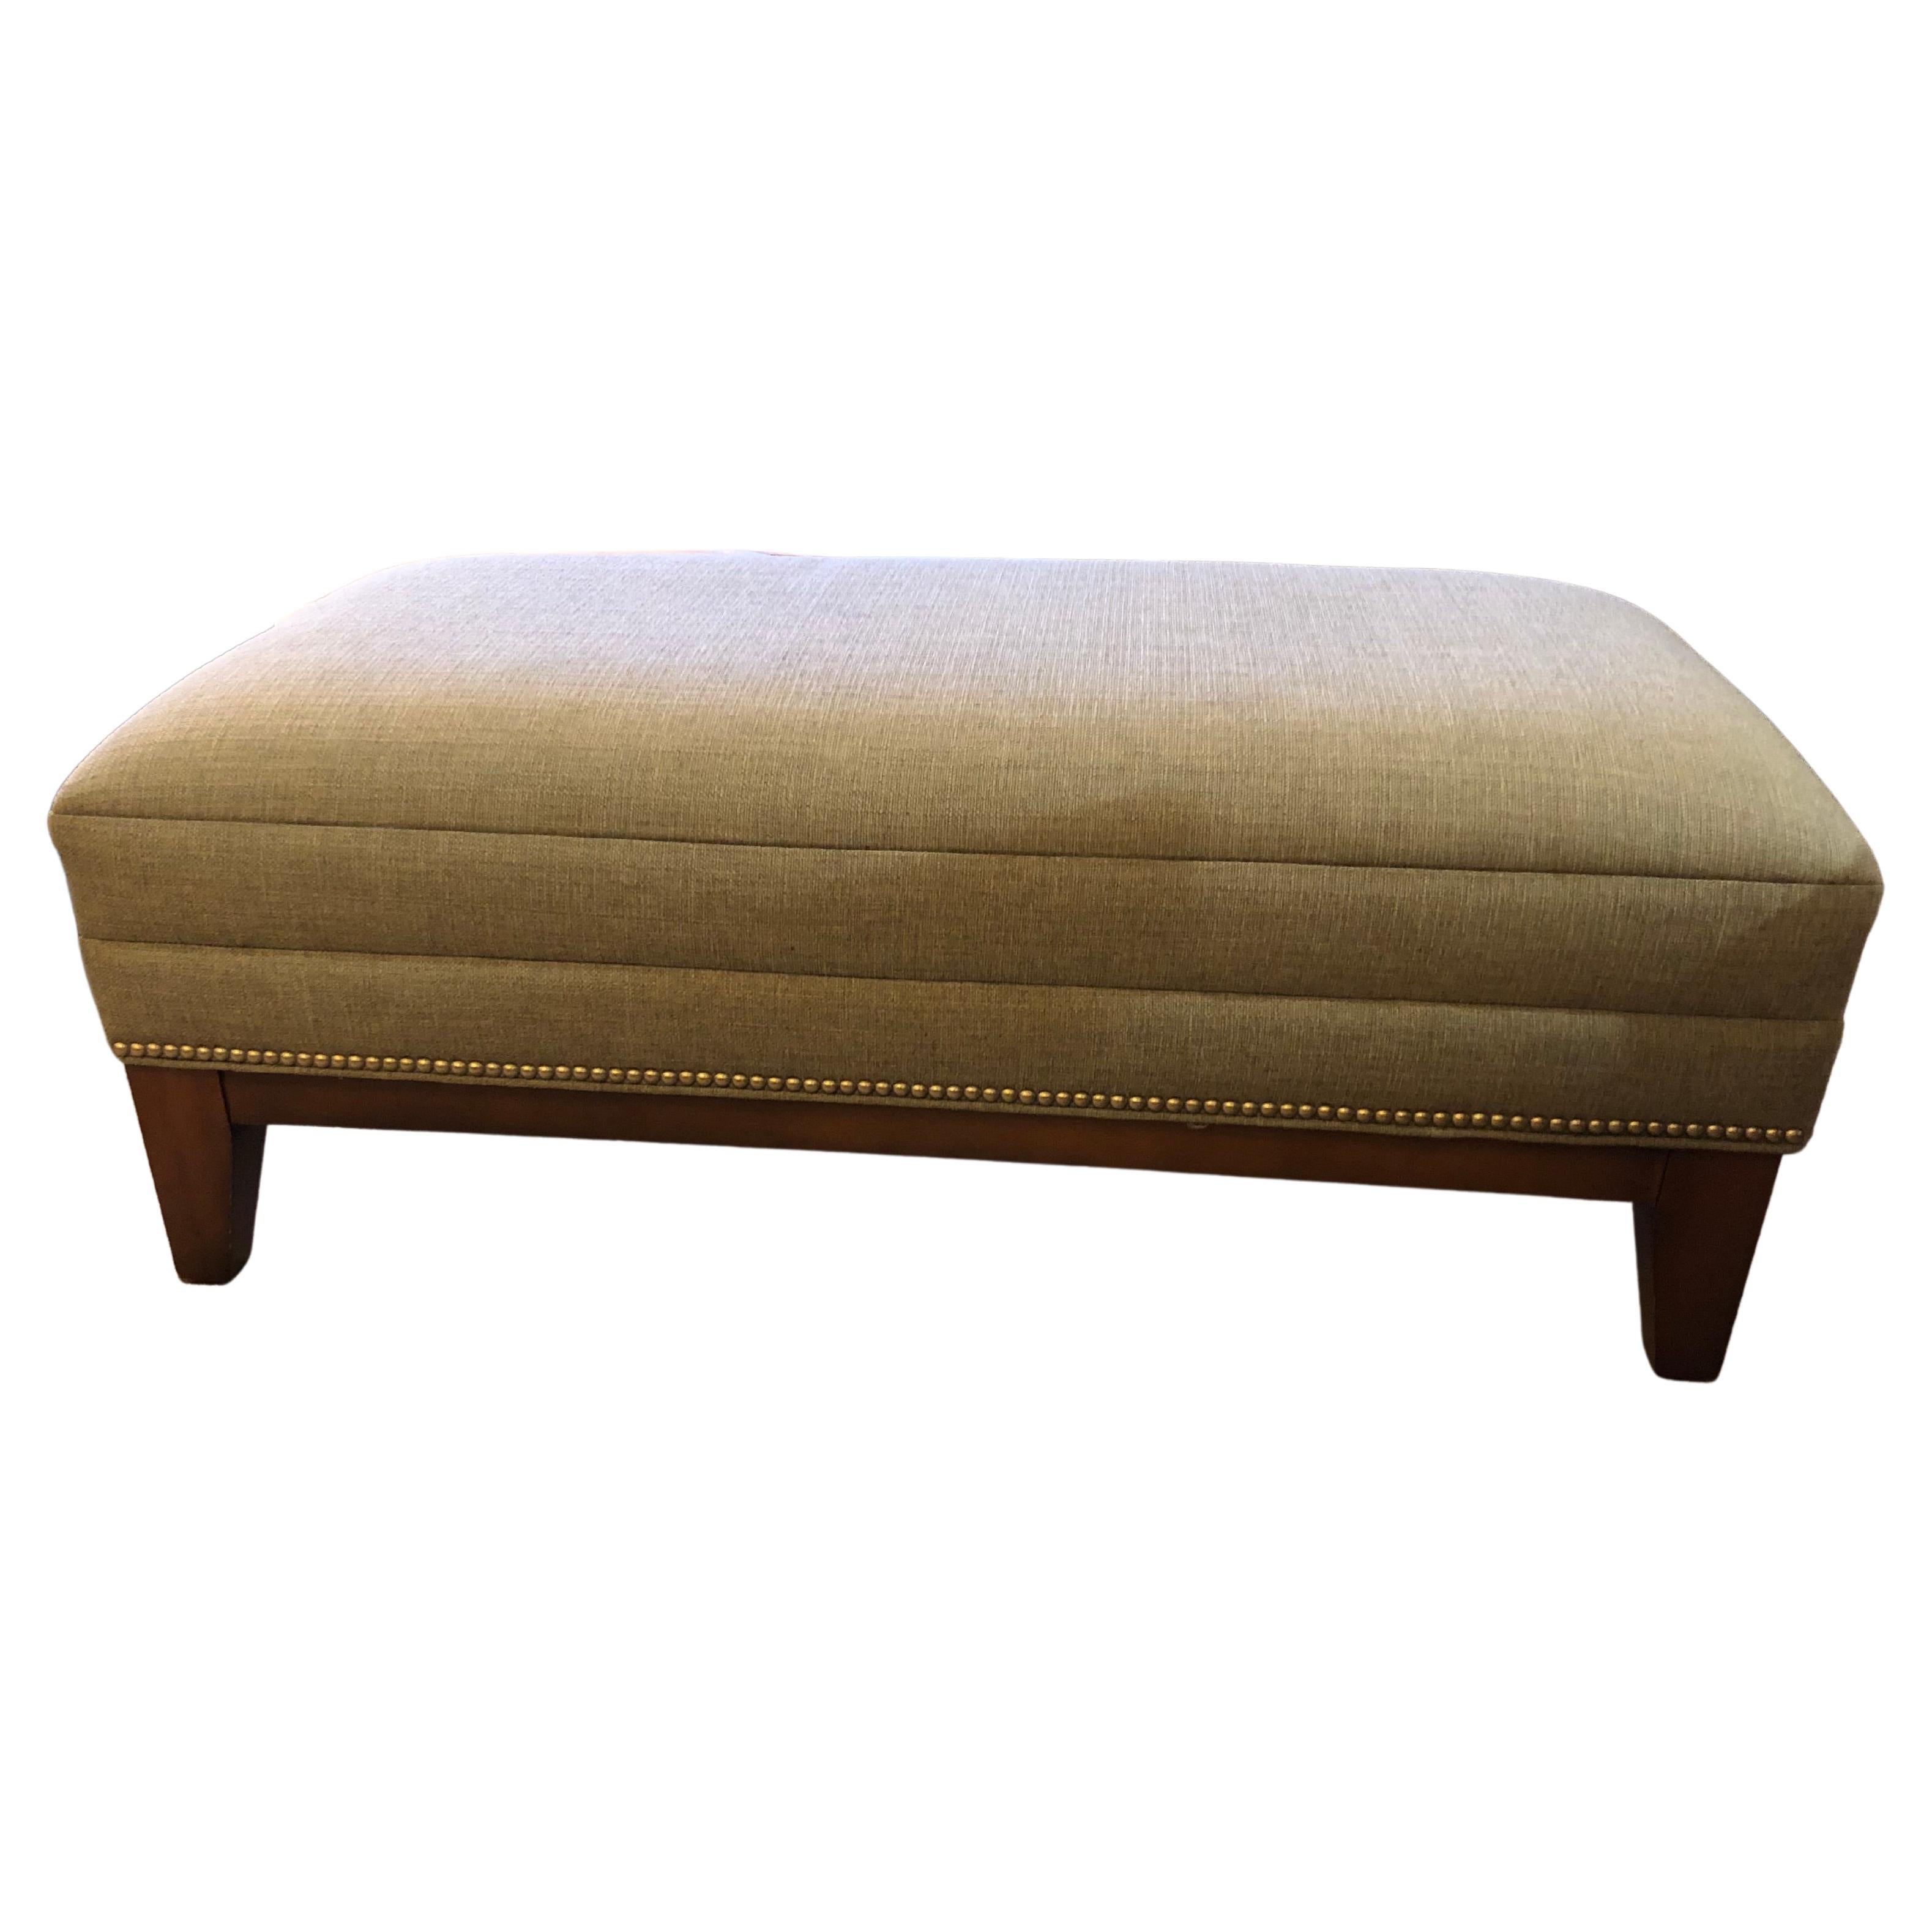 Classic Upholstered Greige Ottoman with Nailheads